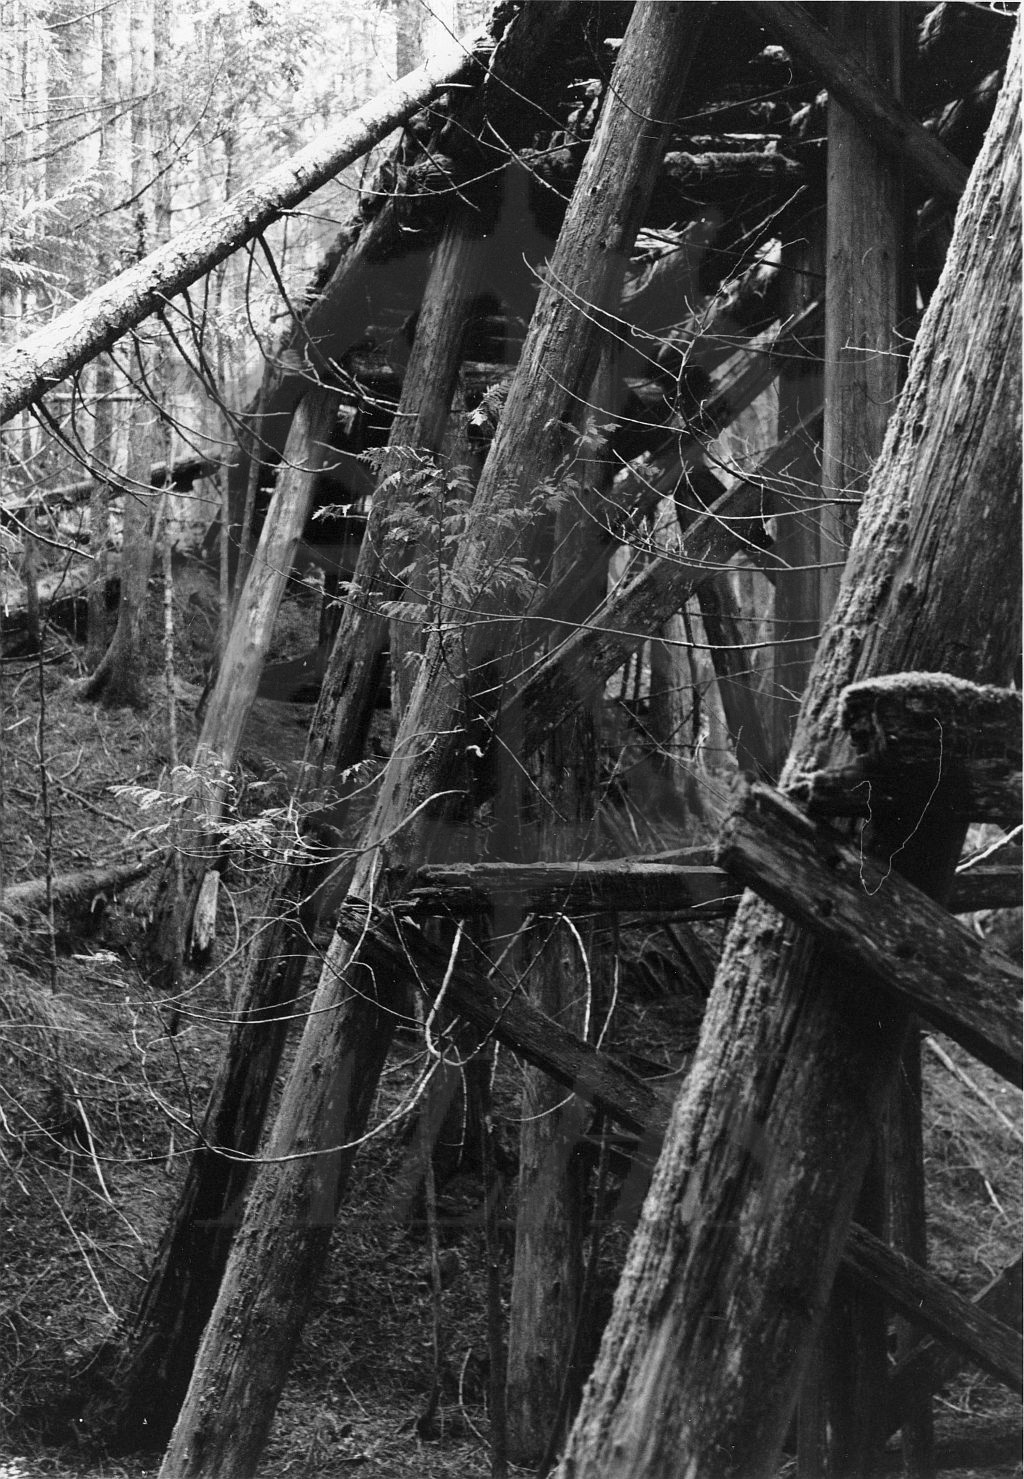 2019.030.2.6 The 16 inch peeled cedar poles forming the trestle bents ...